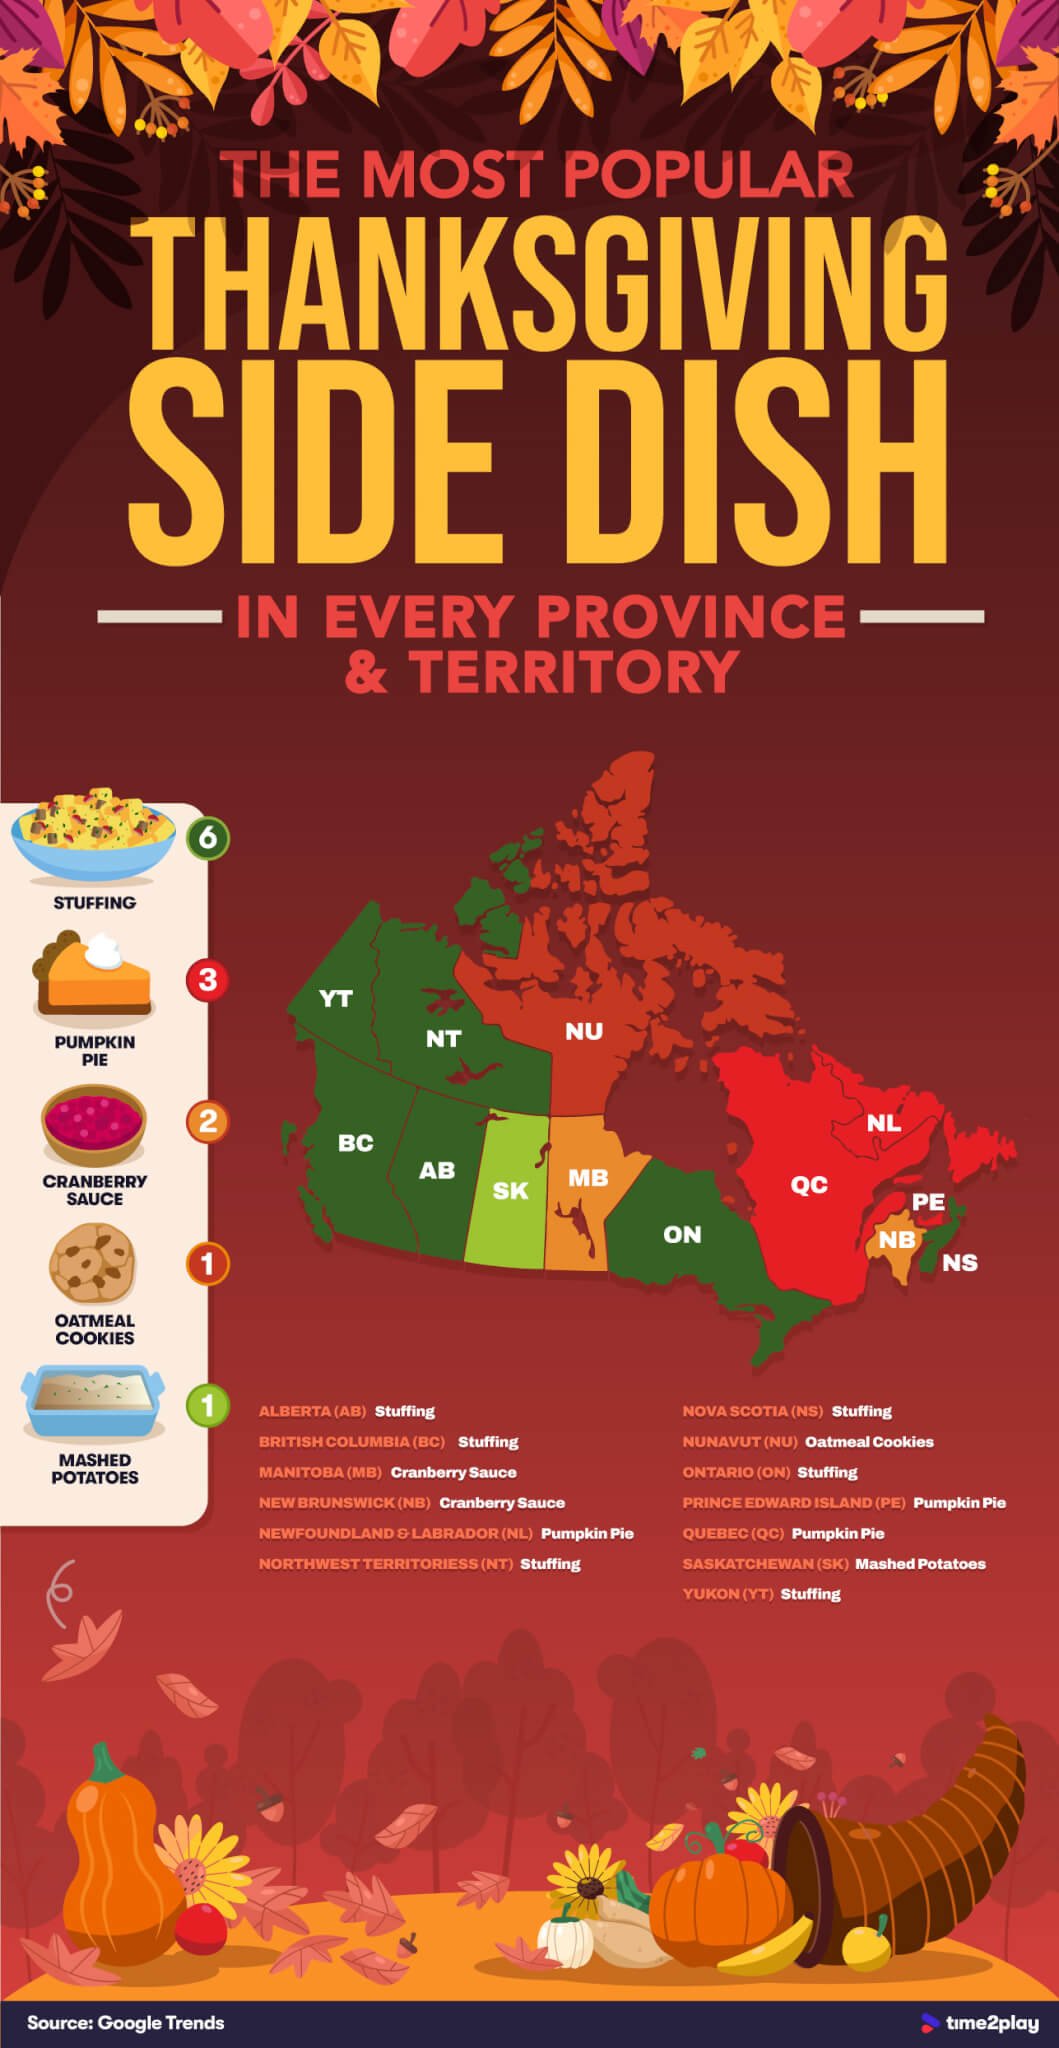 The-most-popular-thanksgiving-side-dish-in-every-province-and-territory